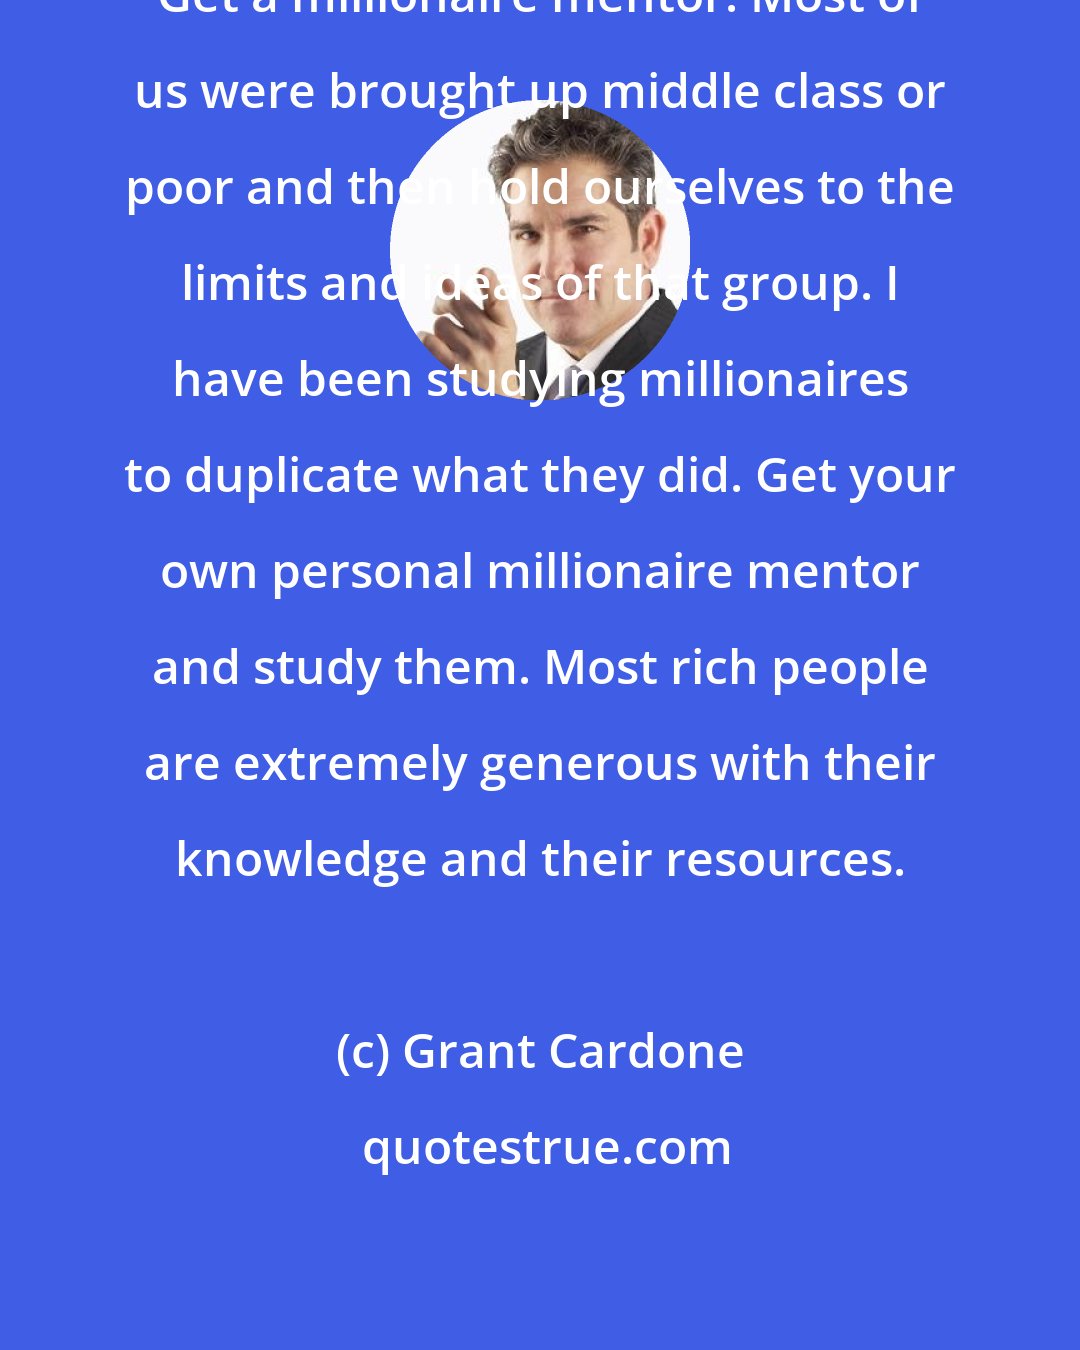 Grant Cardone: Get a millionaire mentor. Most of us were brought up middle class or poor and then hold ourselves to the limits and ideas of that group. I have been studying millionaires to duplicate what they did. Get your own personal millionaire mentor and study them. Most rich people are extremely generous with their knowledge and their resources.